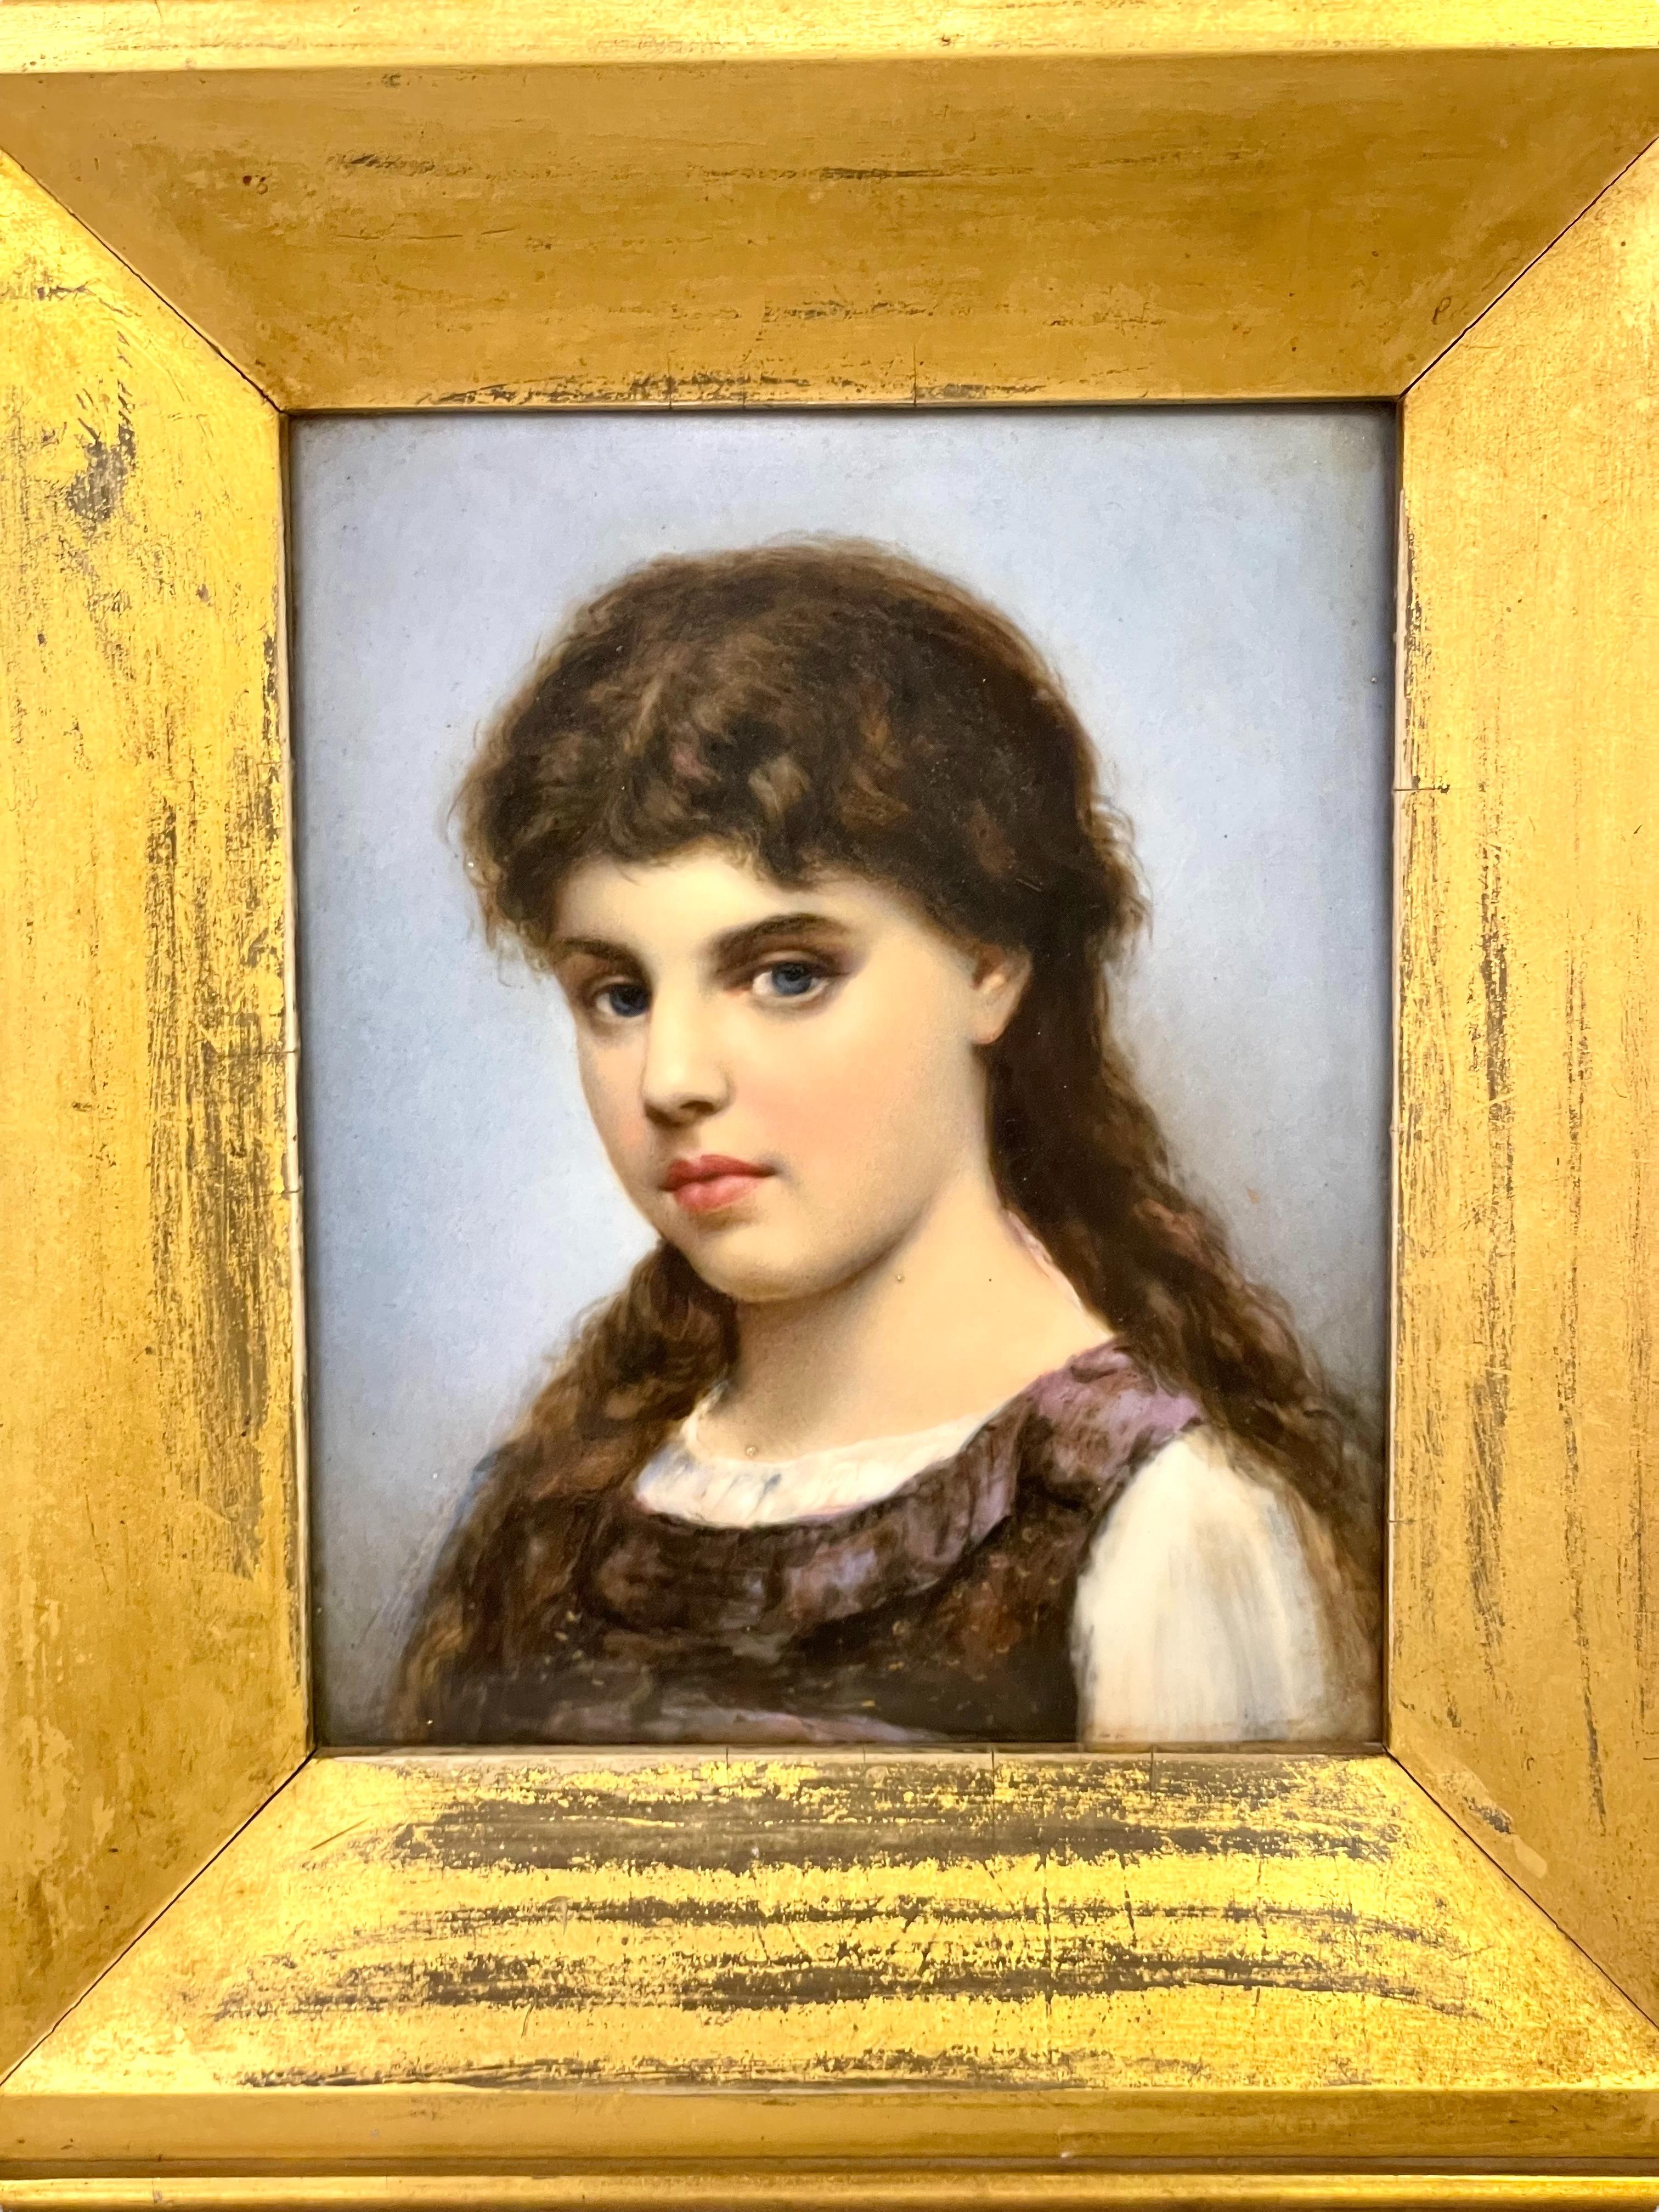 A very fine portrait of a young beauty with dark, flowing locks, cherry lips, and piercing blue eyes. She sits at a slight angle, in a pensive pose, wearing a frilled pinafore and white chemise, the plain pale grey of the backdrop ensuring that the